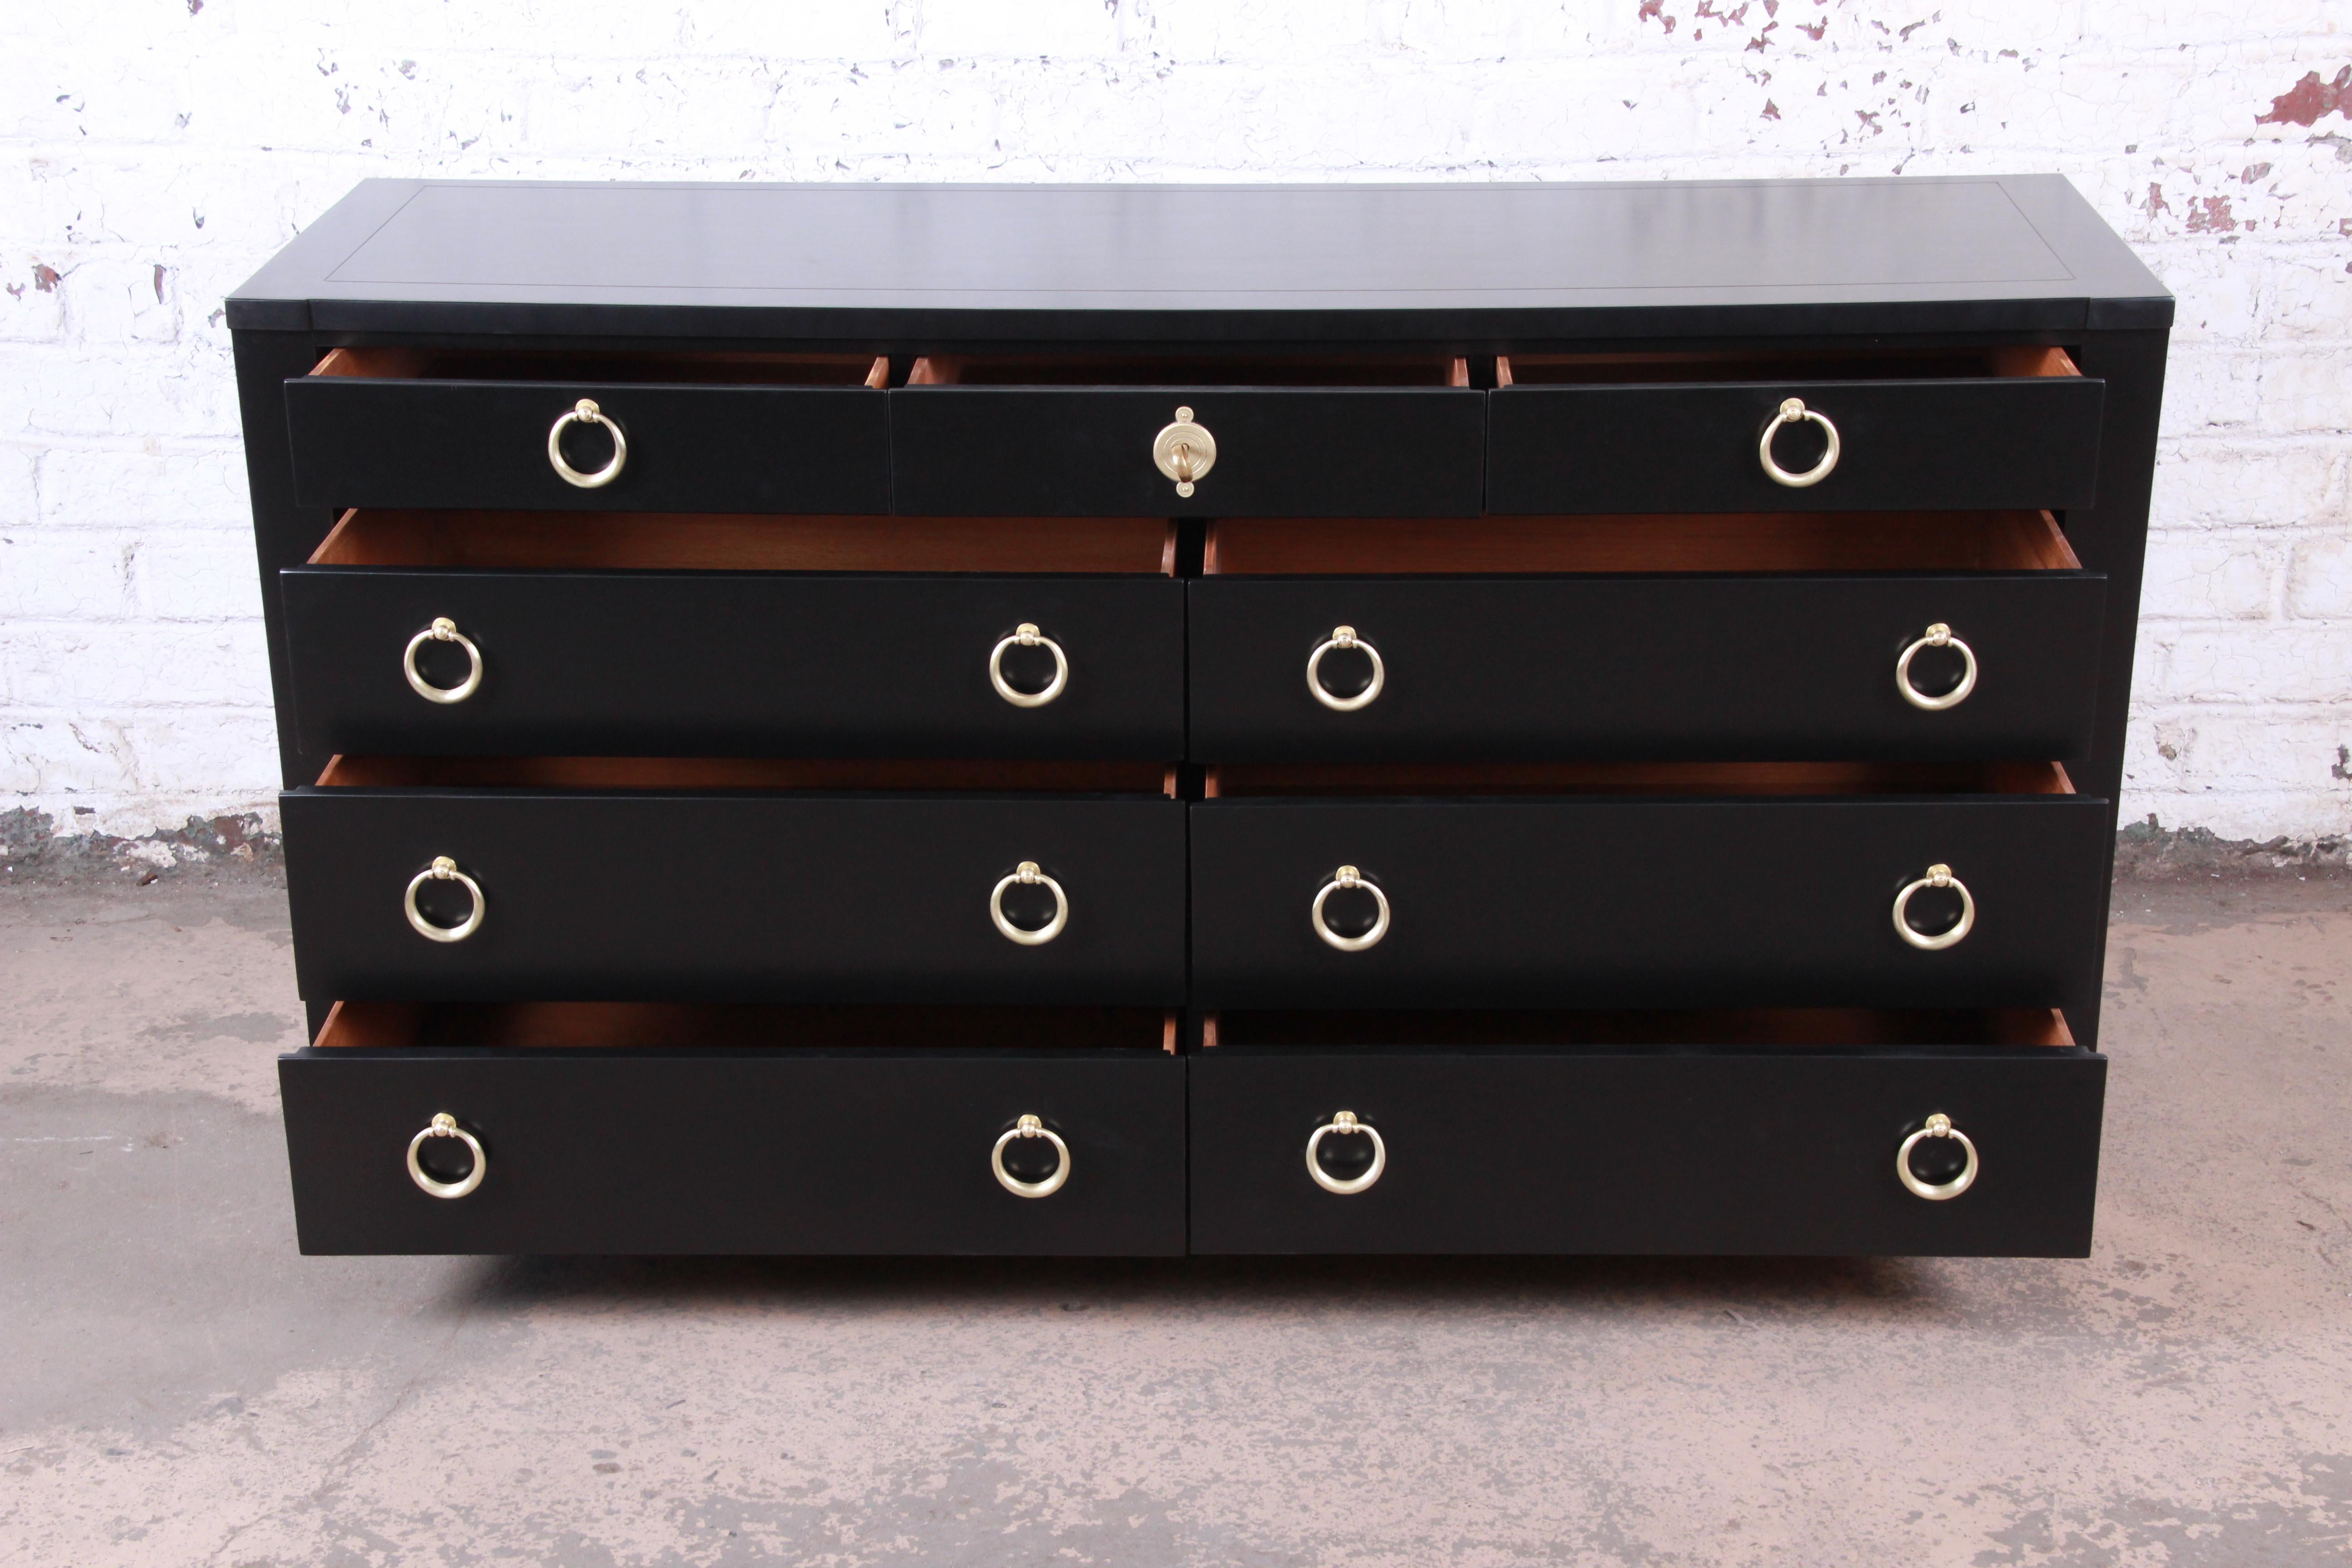 Mid-20th Century Baker Furniture Hollywood Regency Lacquered Dresser or Credenza, Refinished